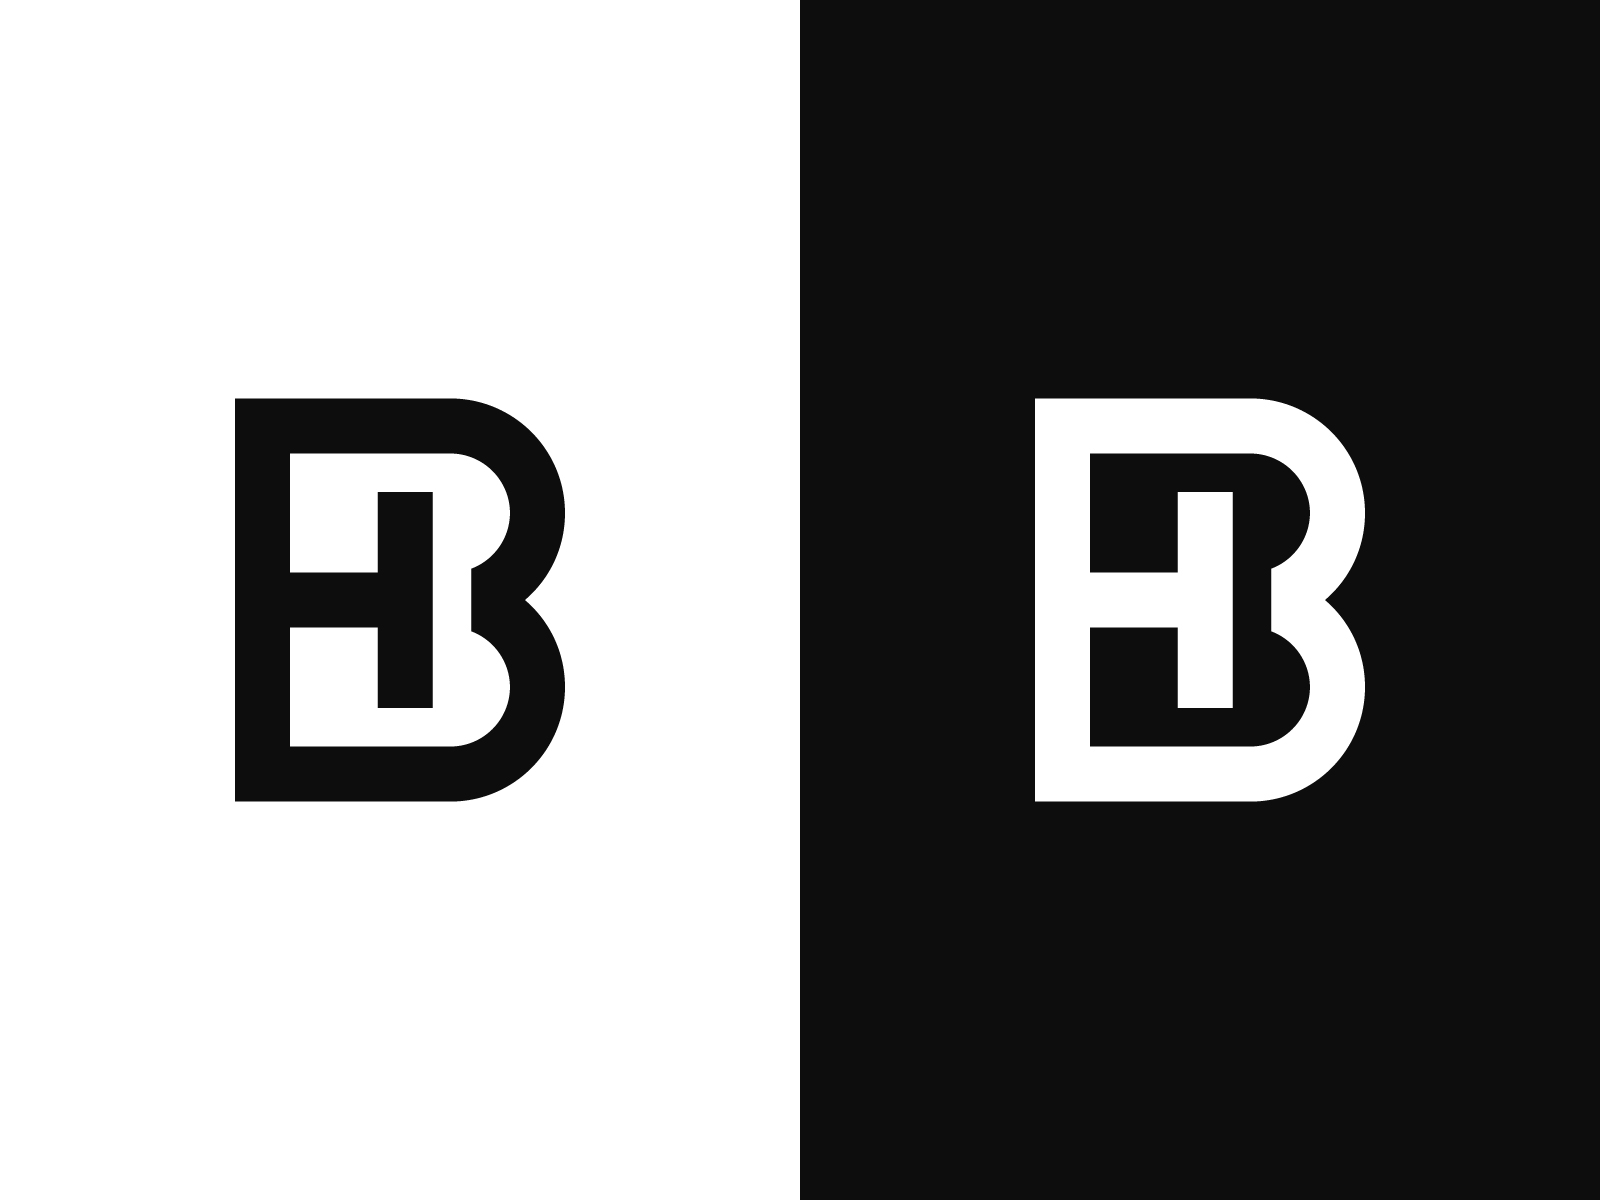 Bh b h brush logo letters with red and black Vector Image